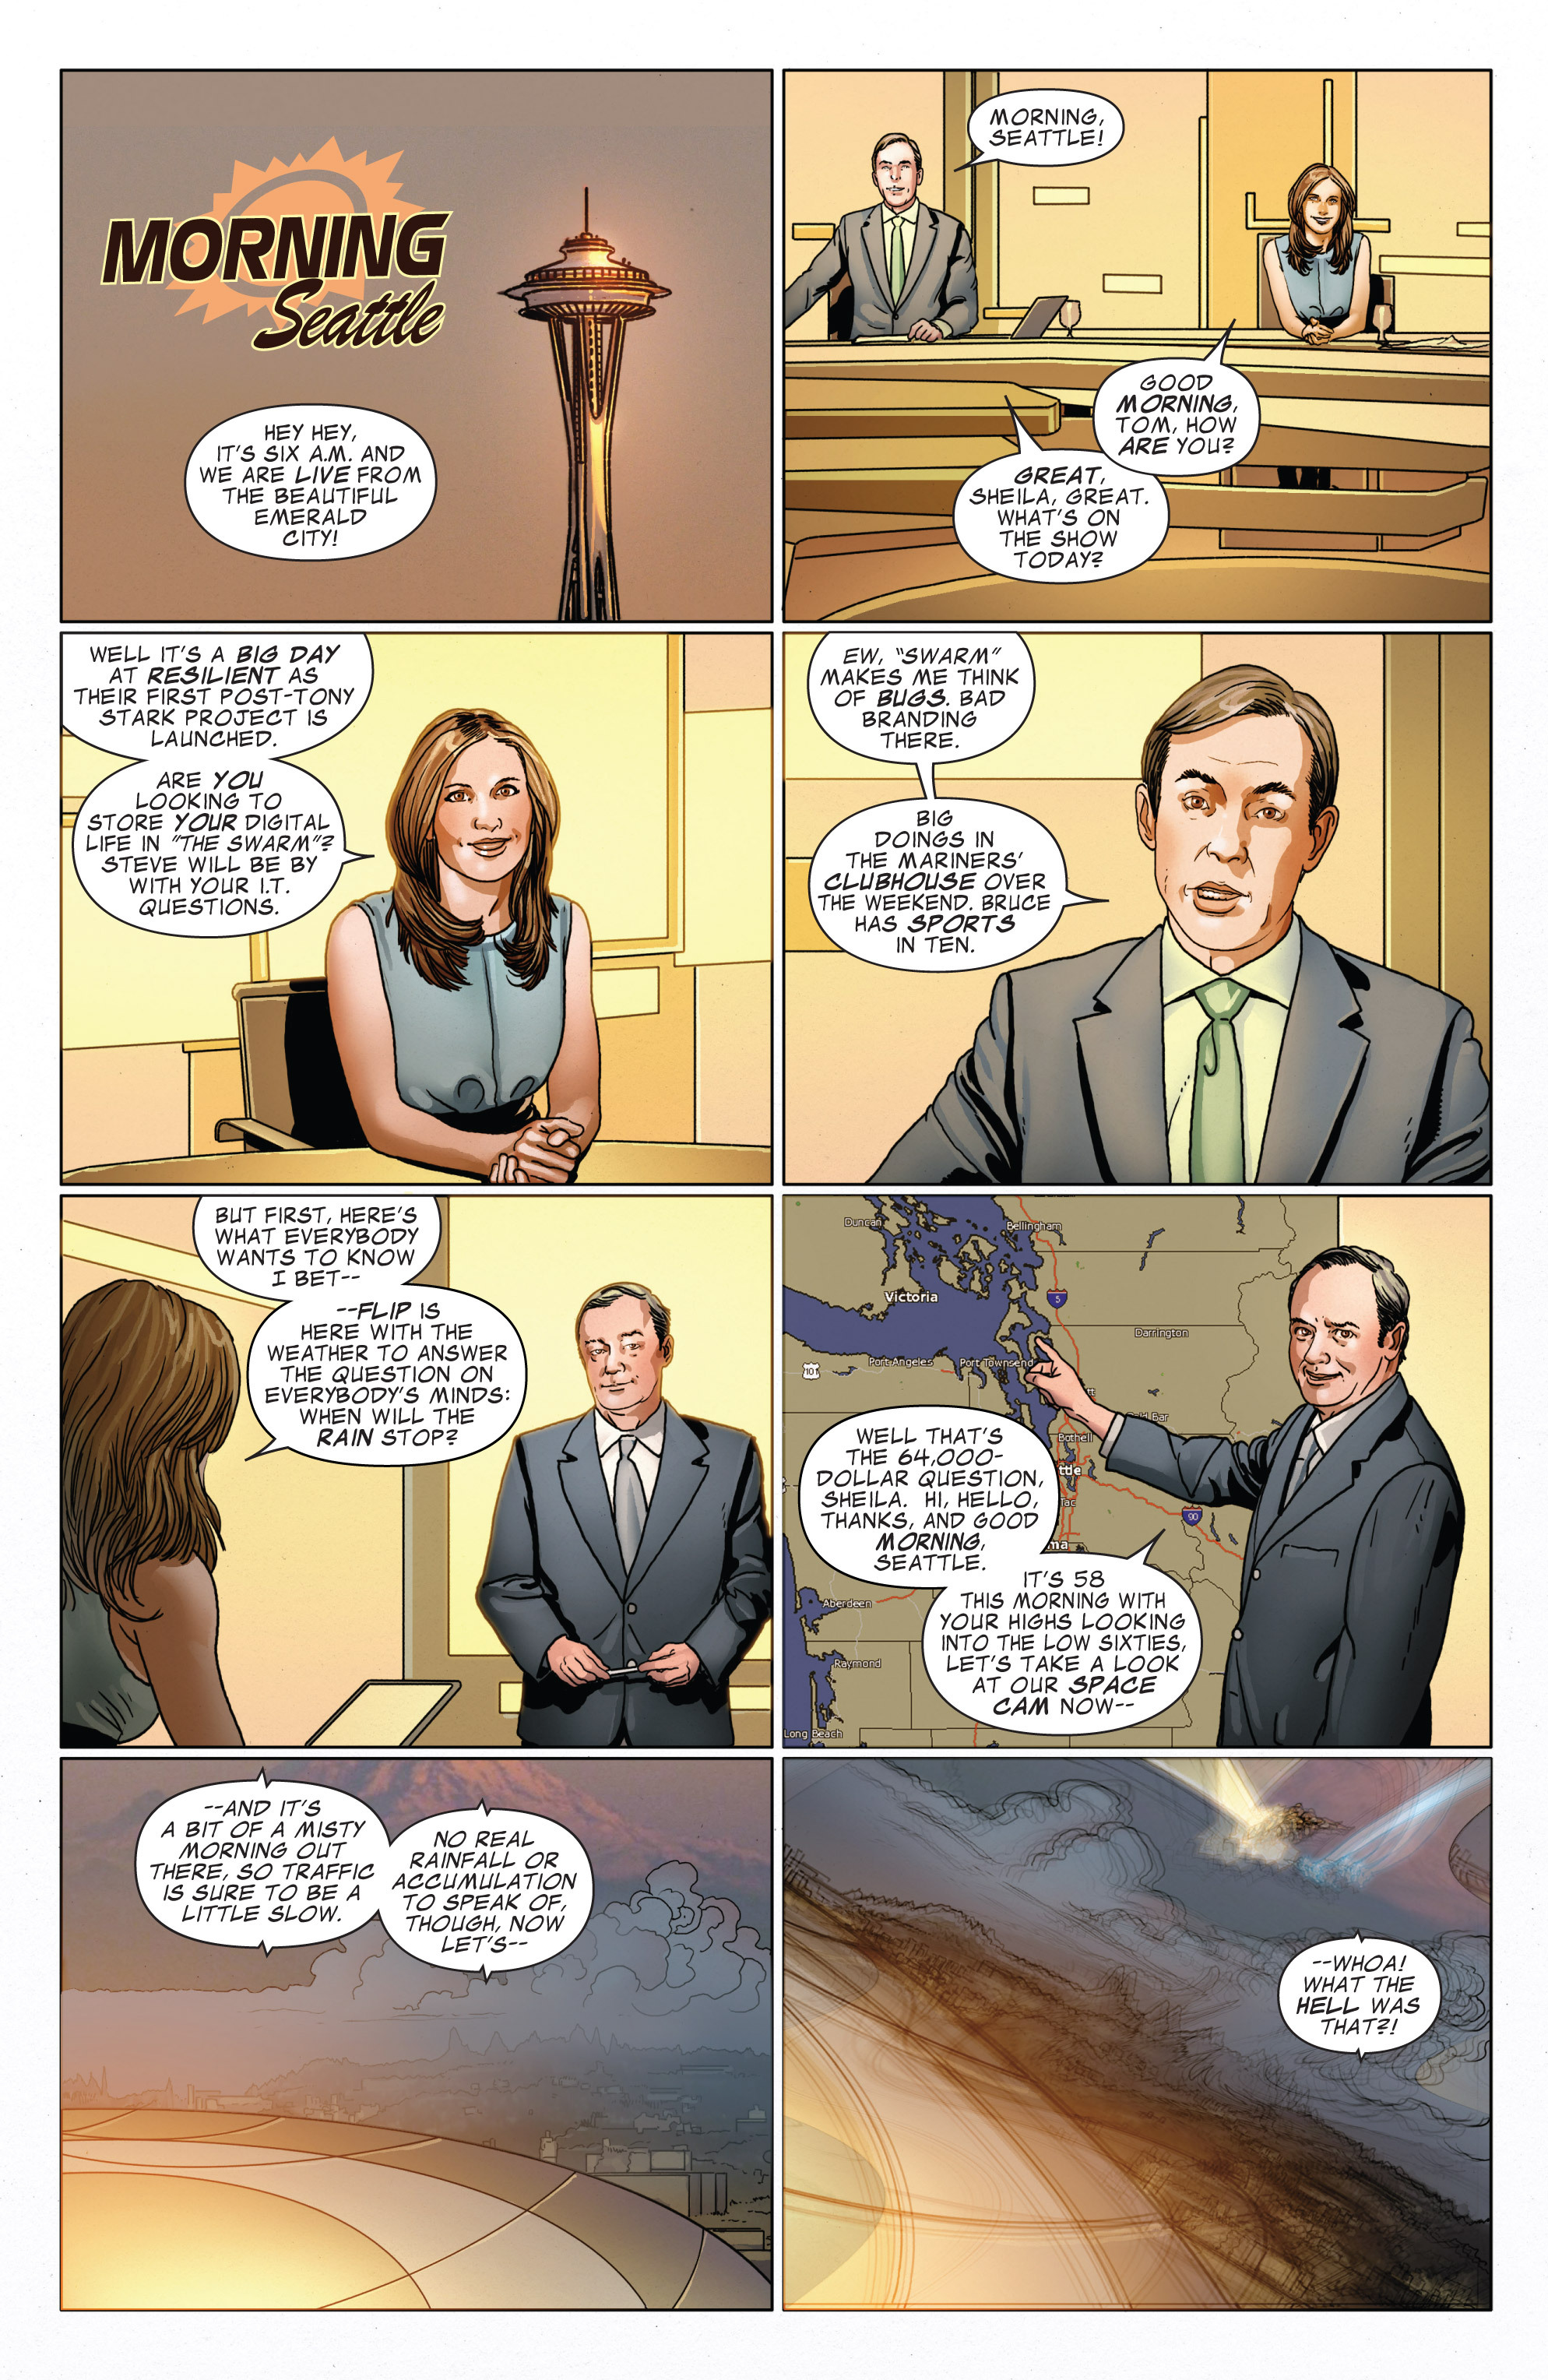 Invincible Iron Man (2008) 523 Page 2